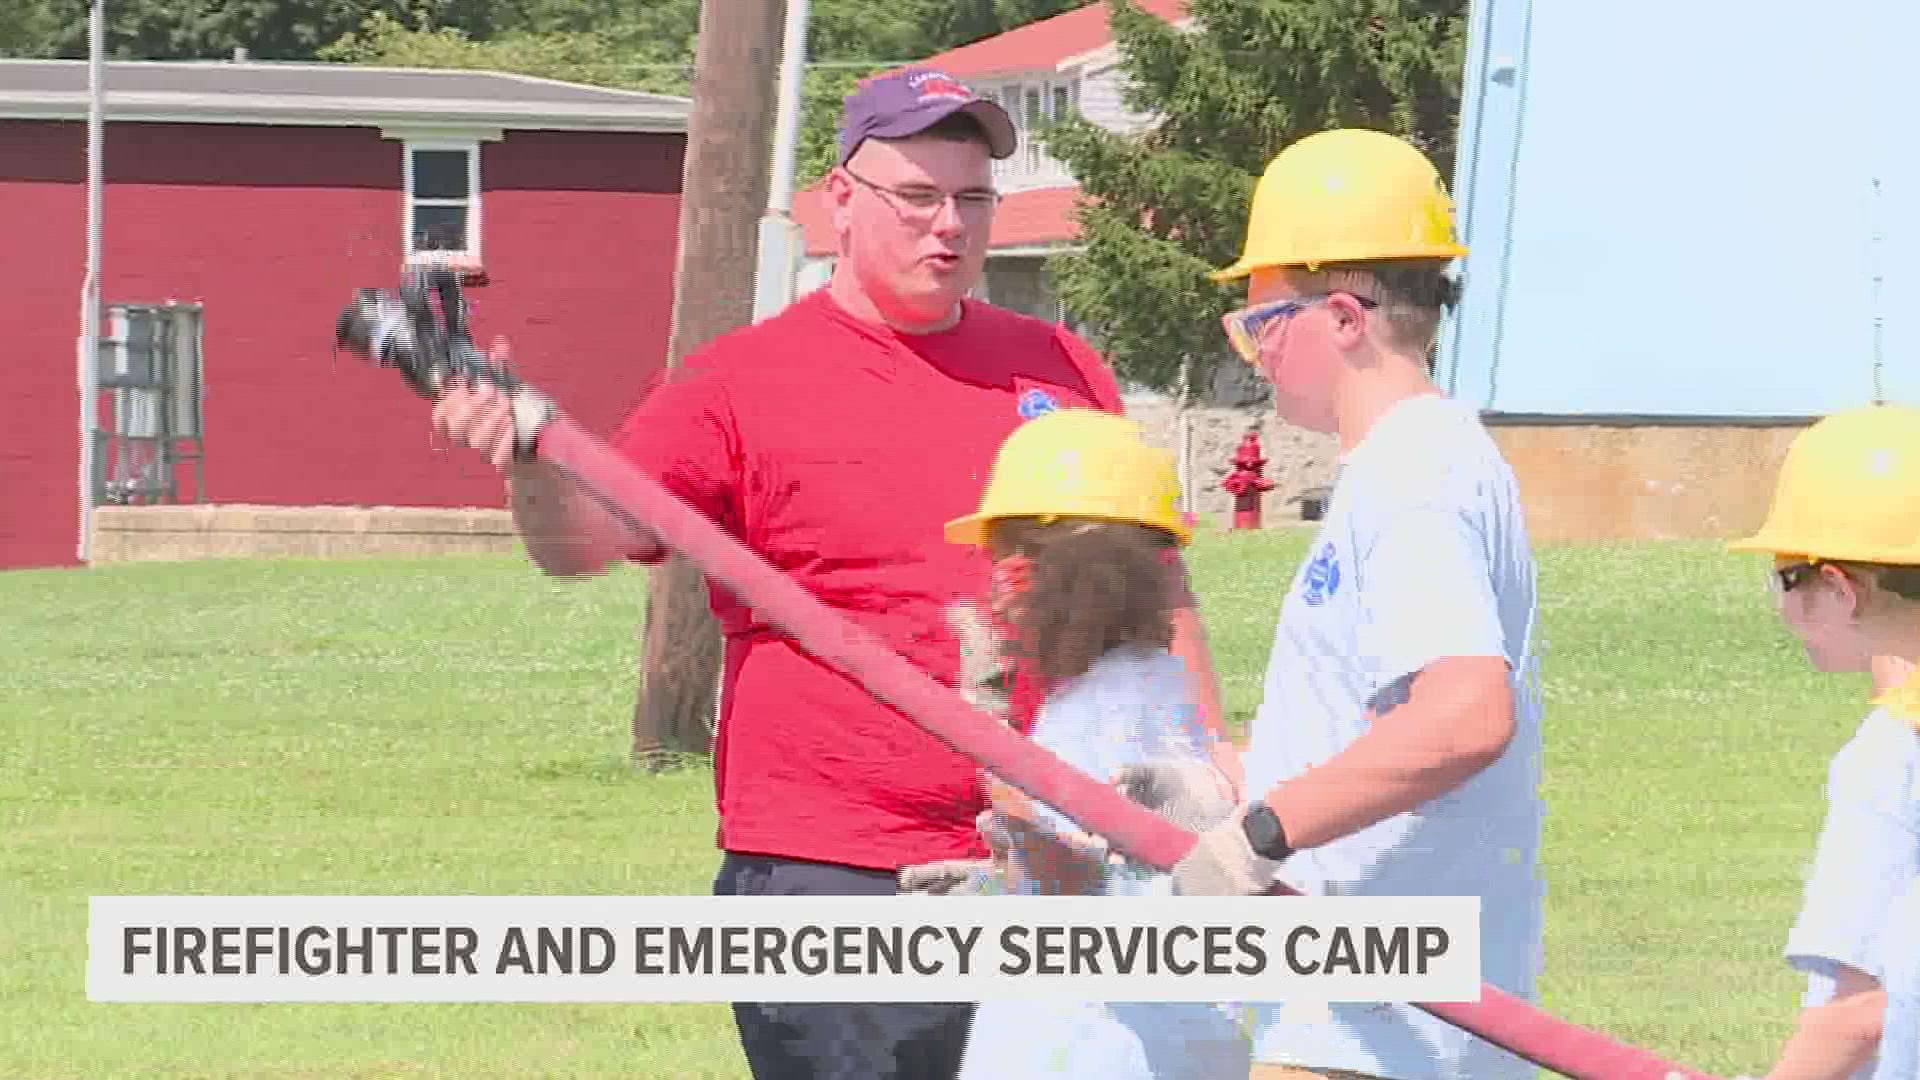 Children learned what it meant to be a first responder at the event hosted by Lafayette Fire Company in East Lampeter Township.